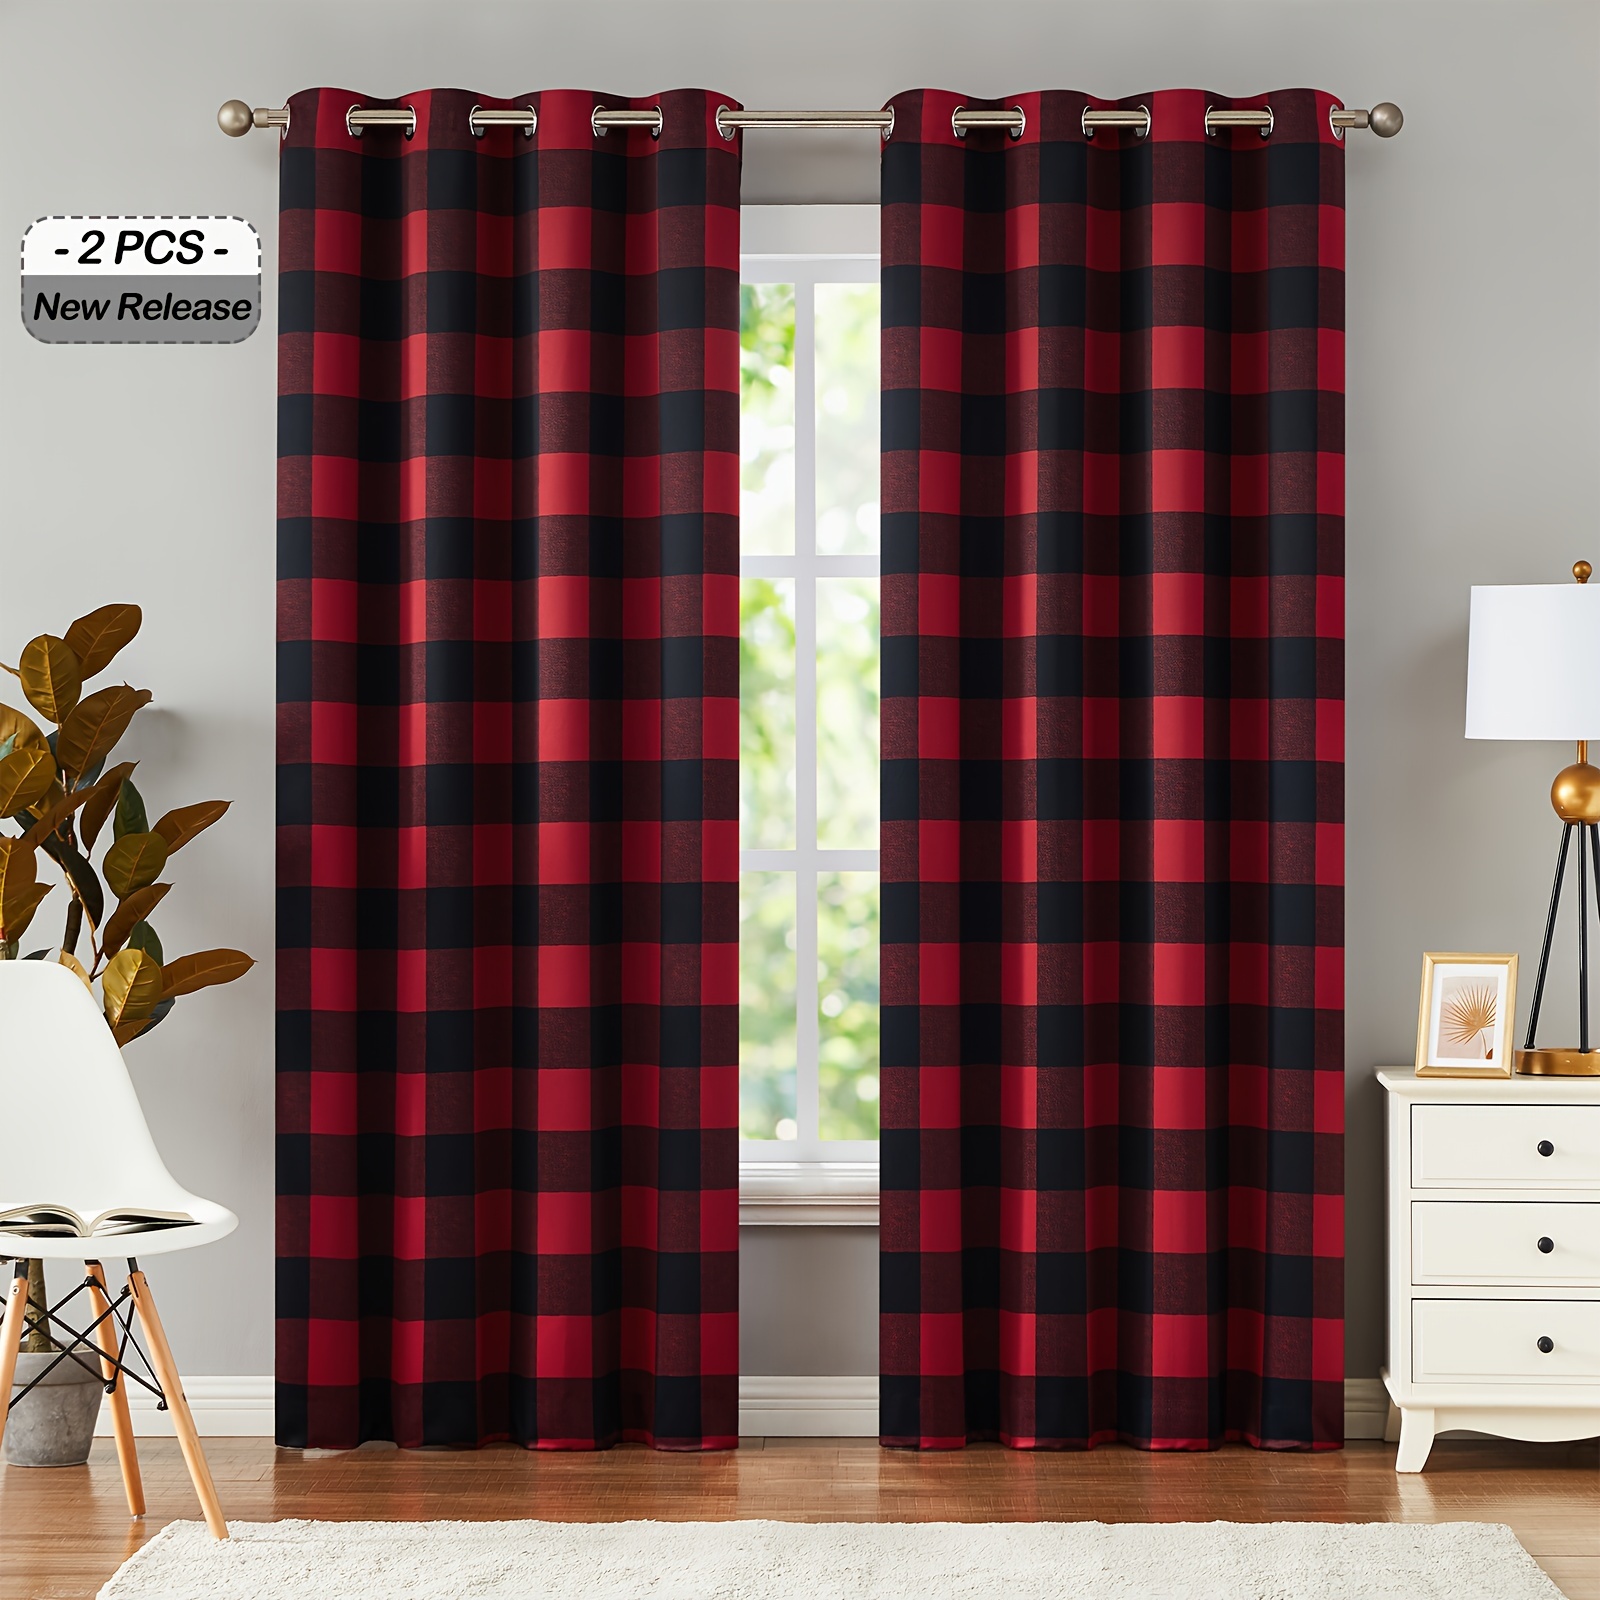 

2 Panels Buffalo Check Plaid Blackout Curtains For Bedroom, Living Room Thermal Insulated Room Darkening Grommet Drapes